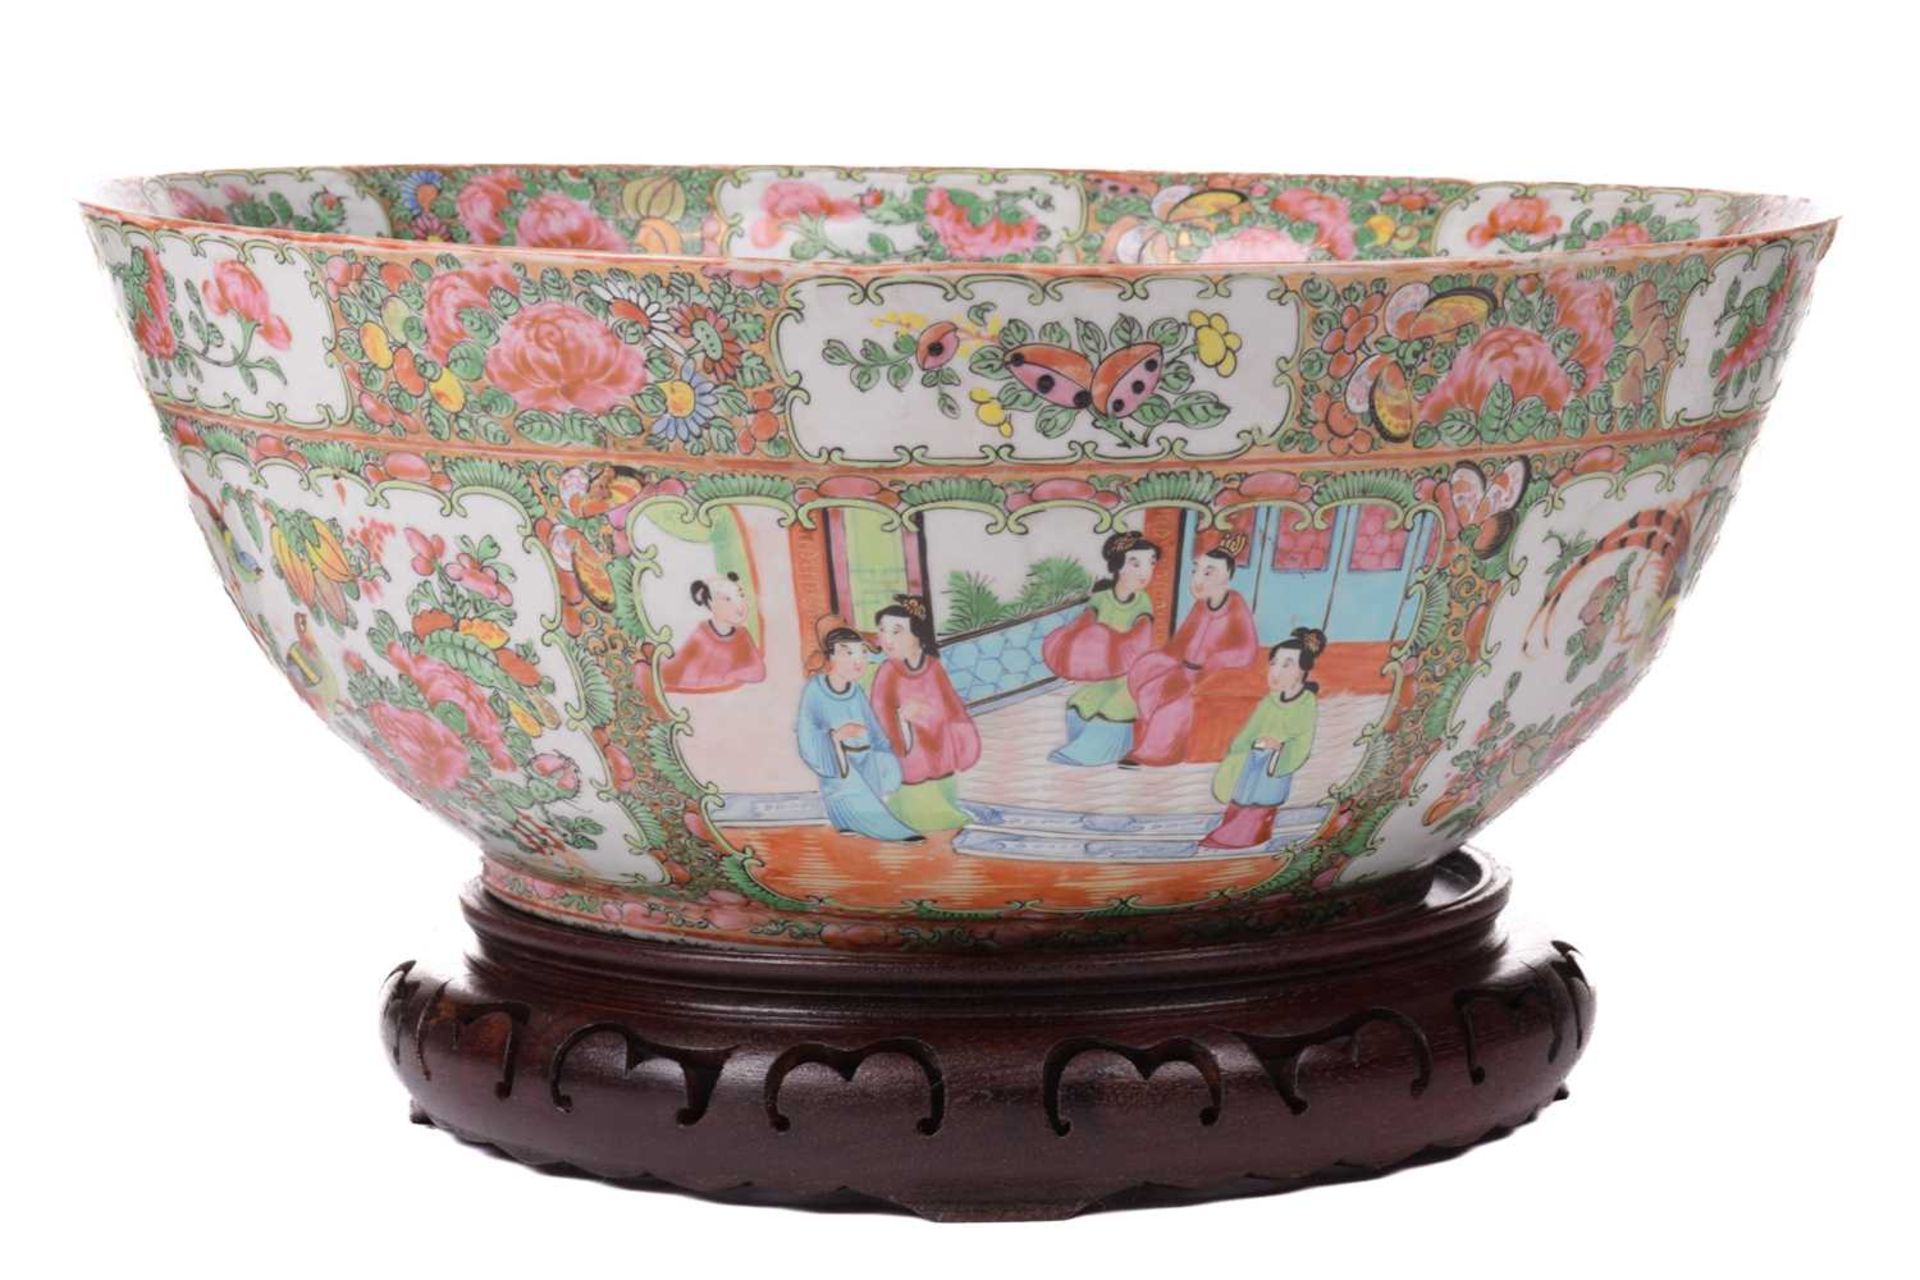 A large Cantonese 'Famille rose' enamel punch bowl, 19th century, decorated with alternating